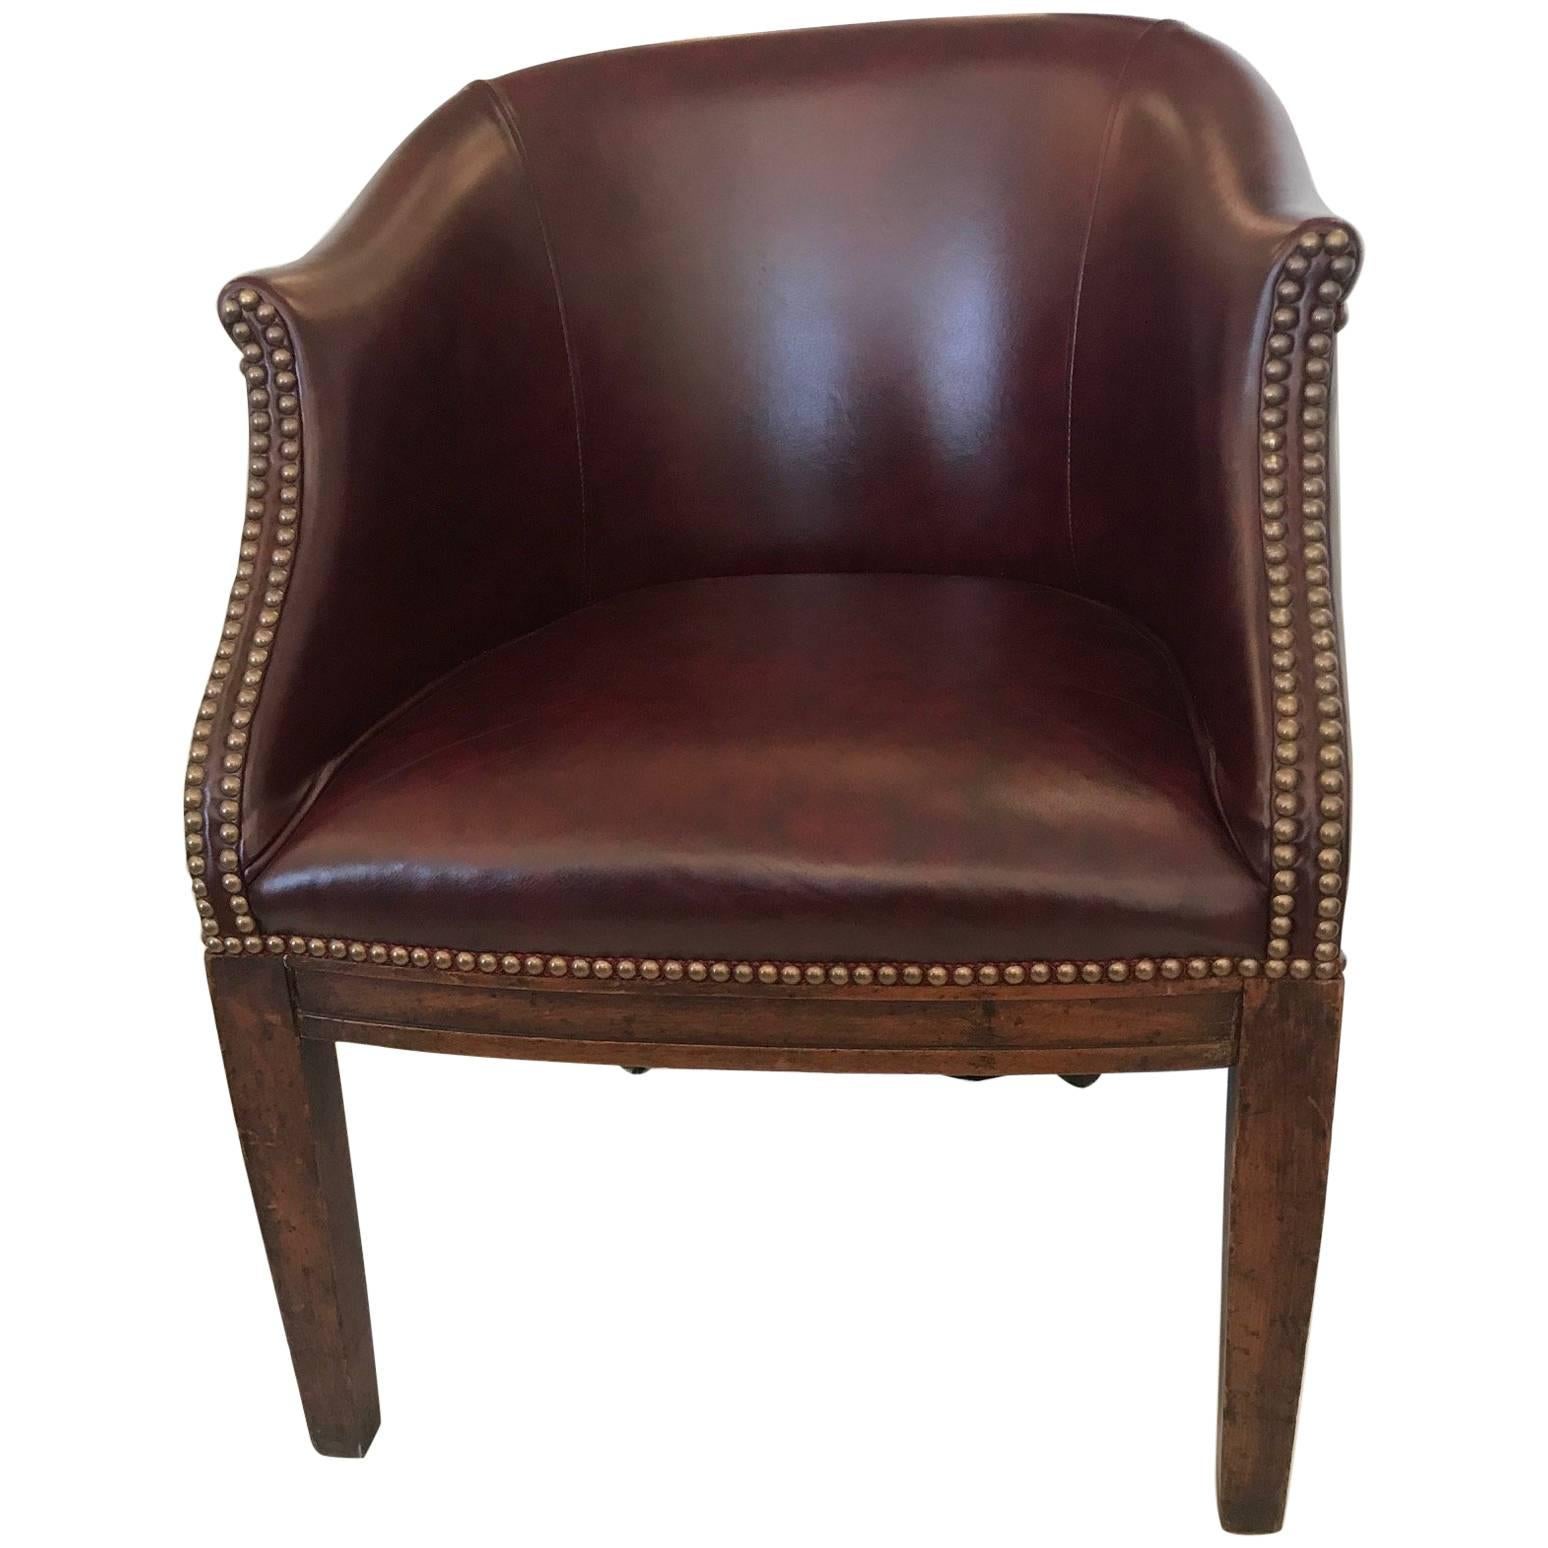 Masculine Antique English Barrel Back Leather Tub Chair